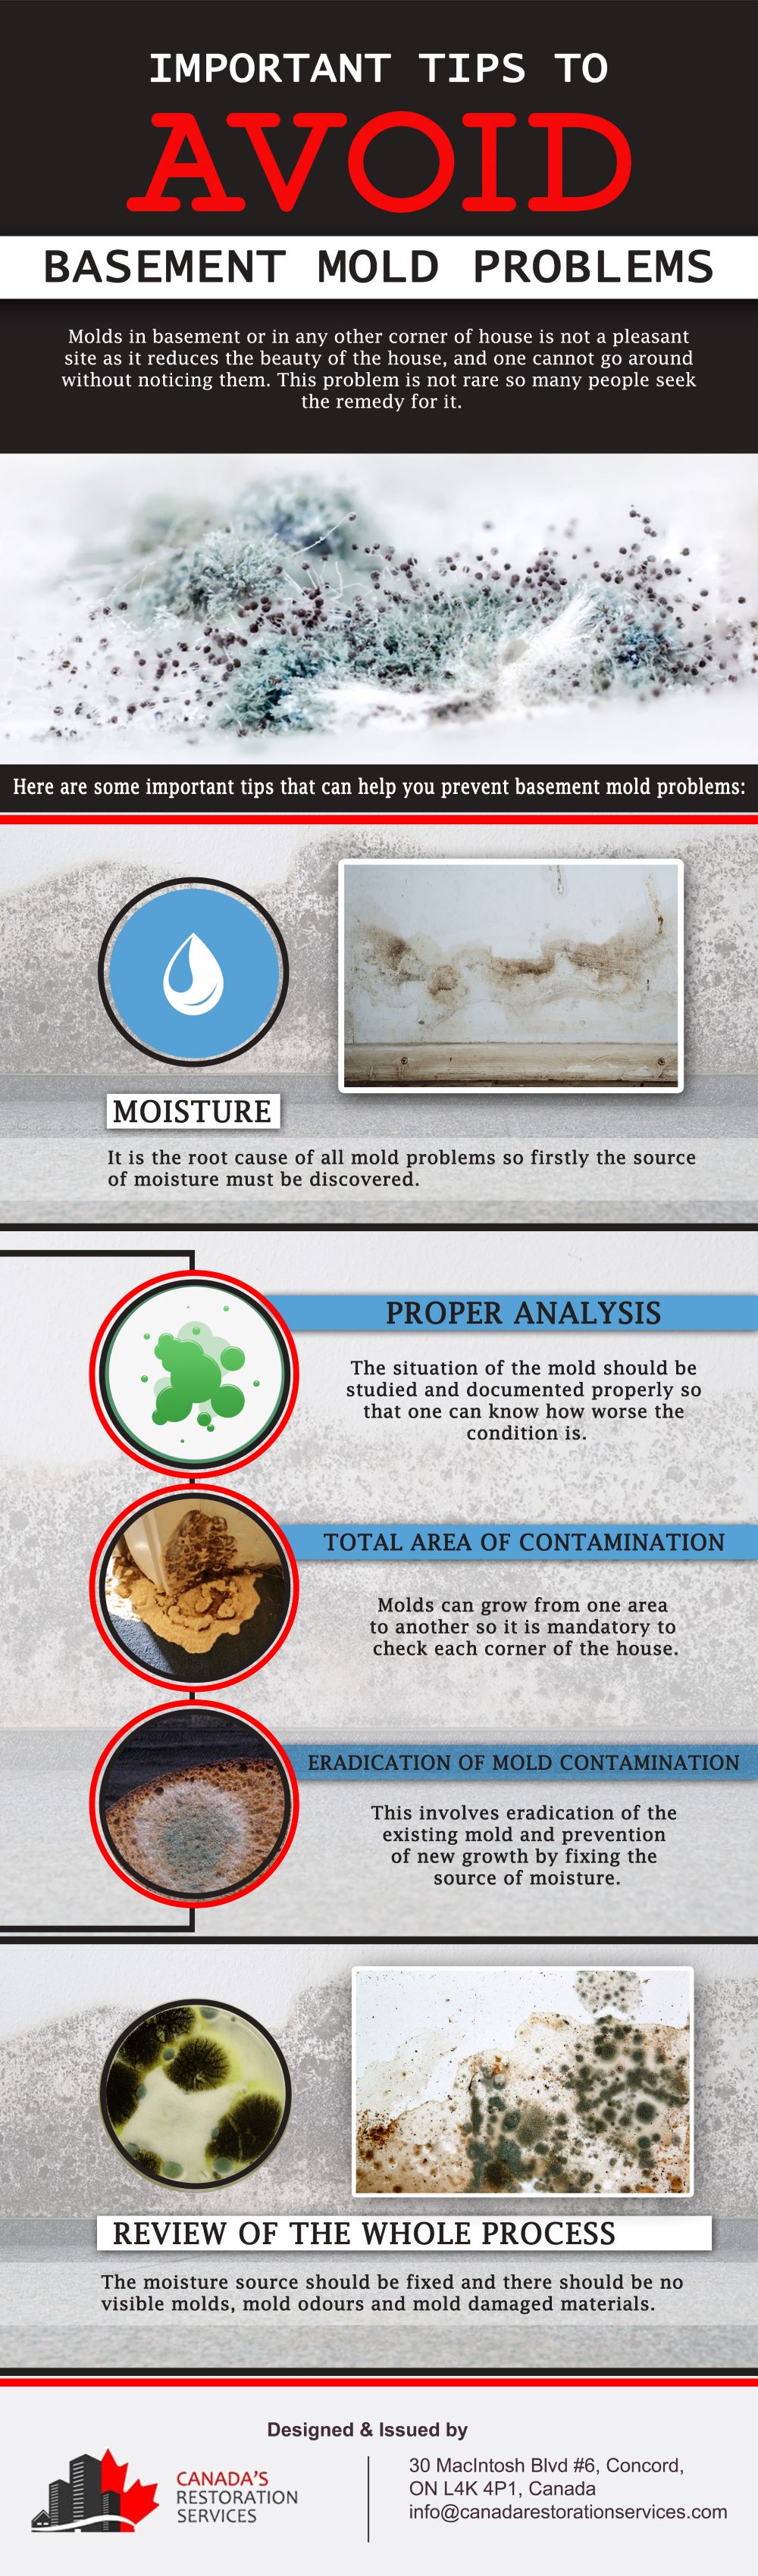 Important Tips to Avoid Basement Mold Problems